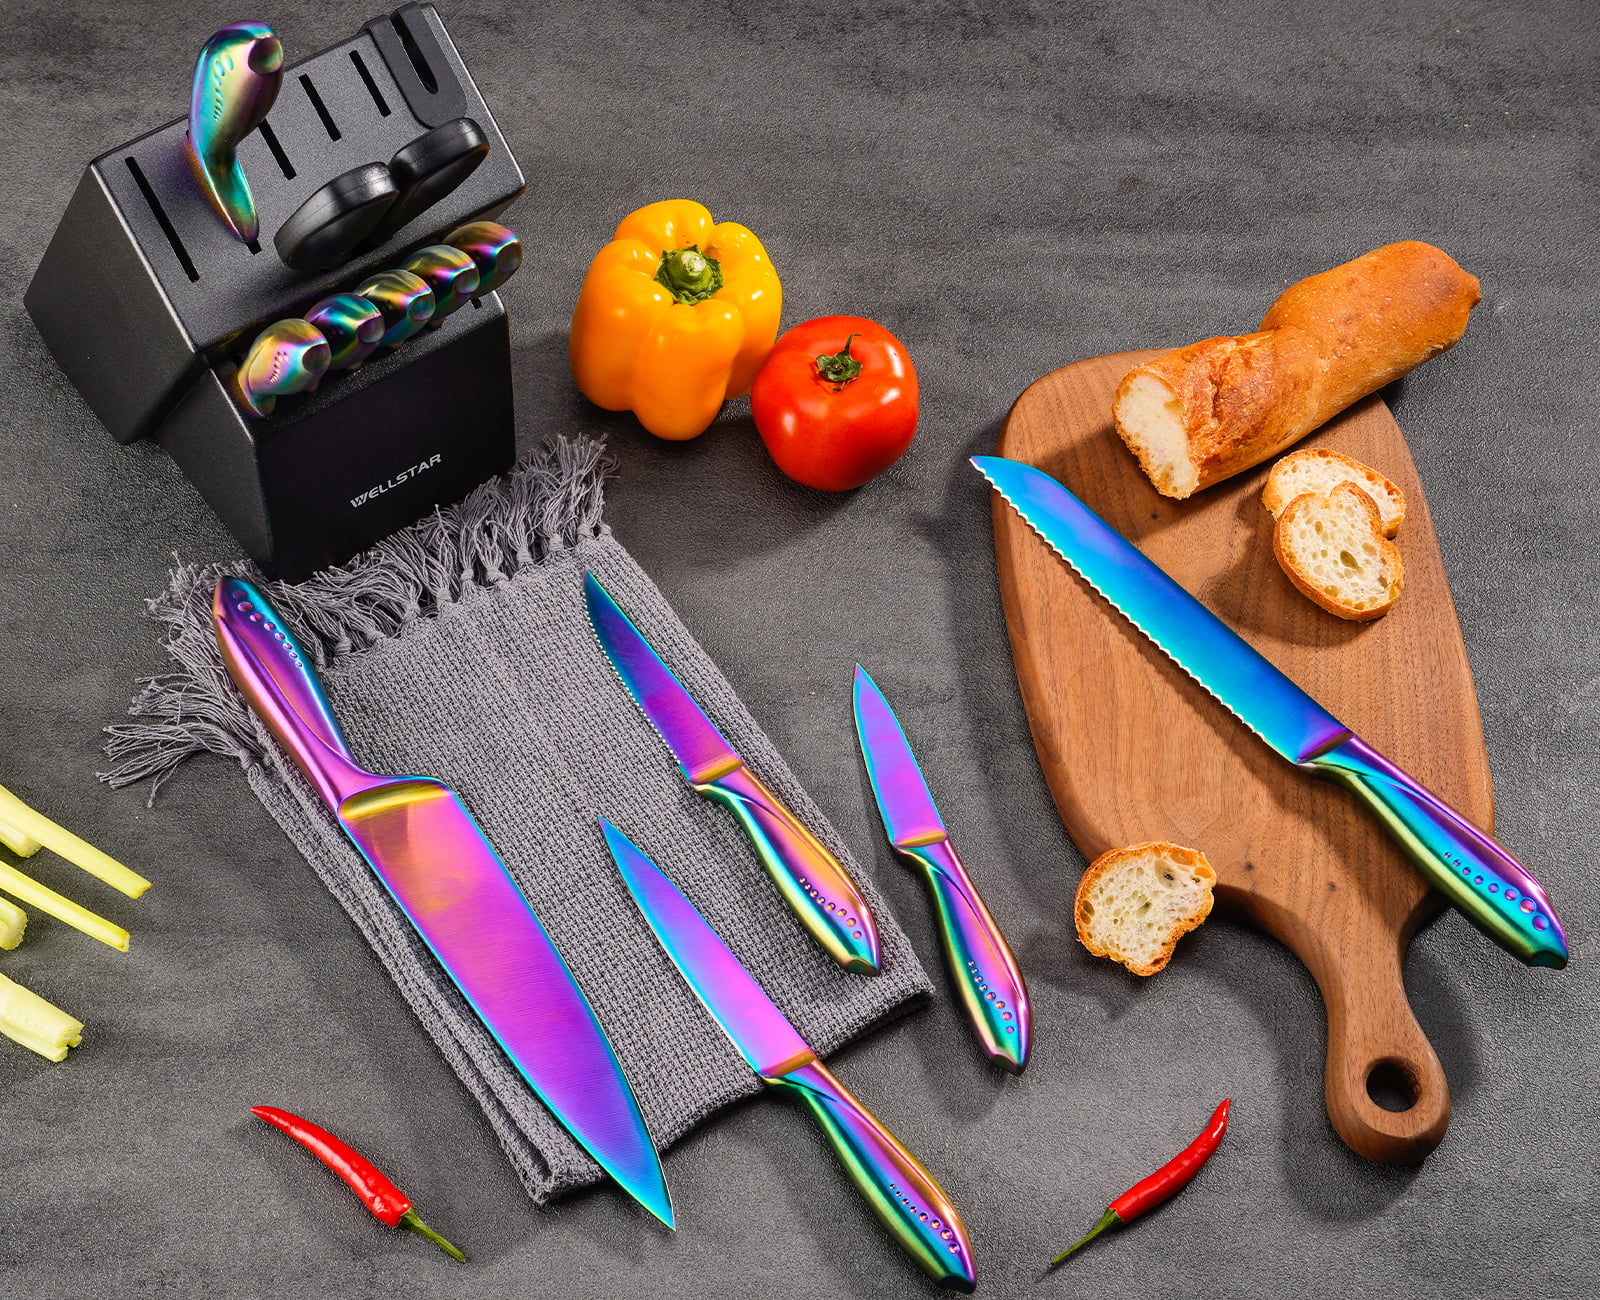 Rainbow Color Knife Set with Block,14 PCS Kitchen Knife Set with Acrylic  Stand Plus Rainbow Color Long Handle Spoons, Colorful Plated Latte Spoon